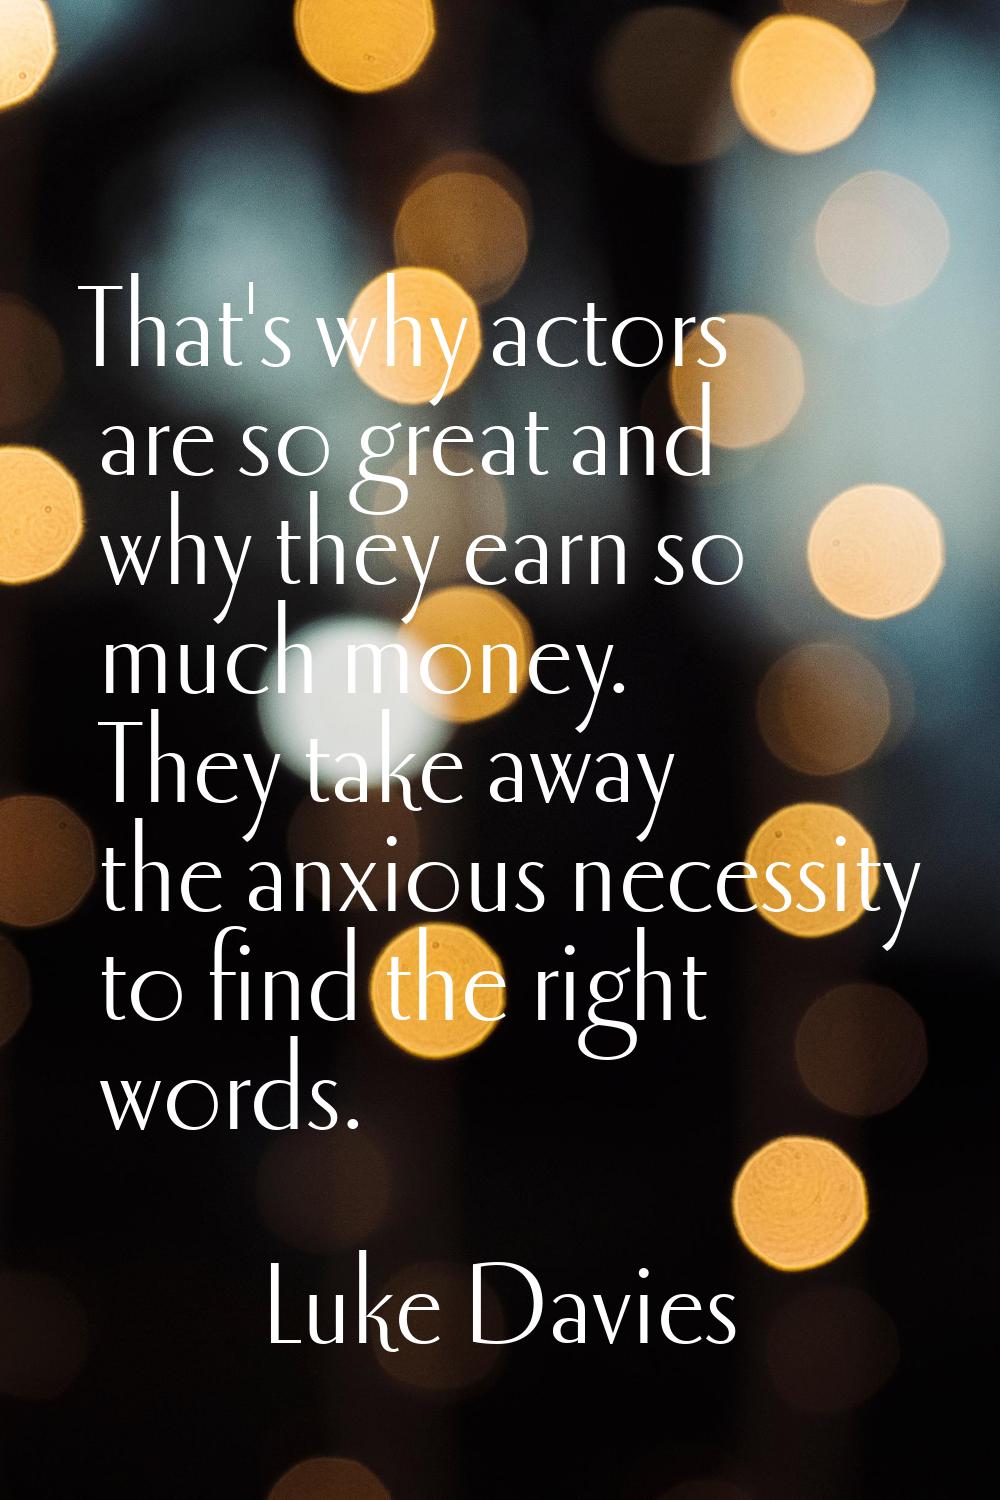 That's why actors are so great and why they earn so much money. They take away the anxious necessit